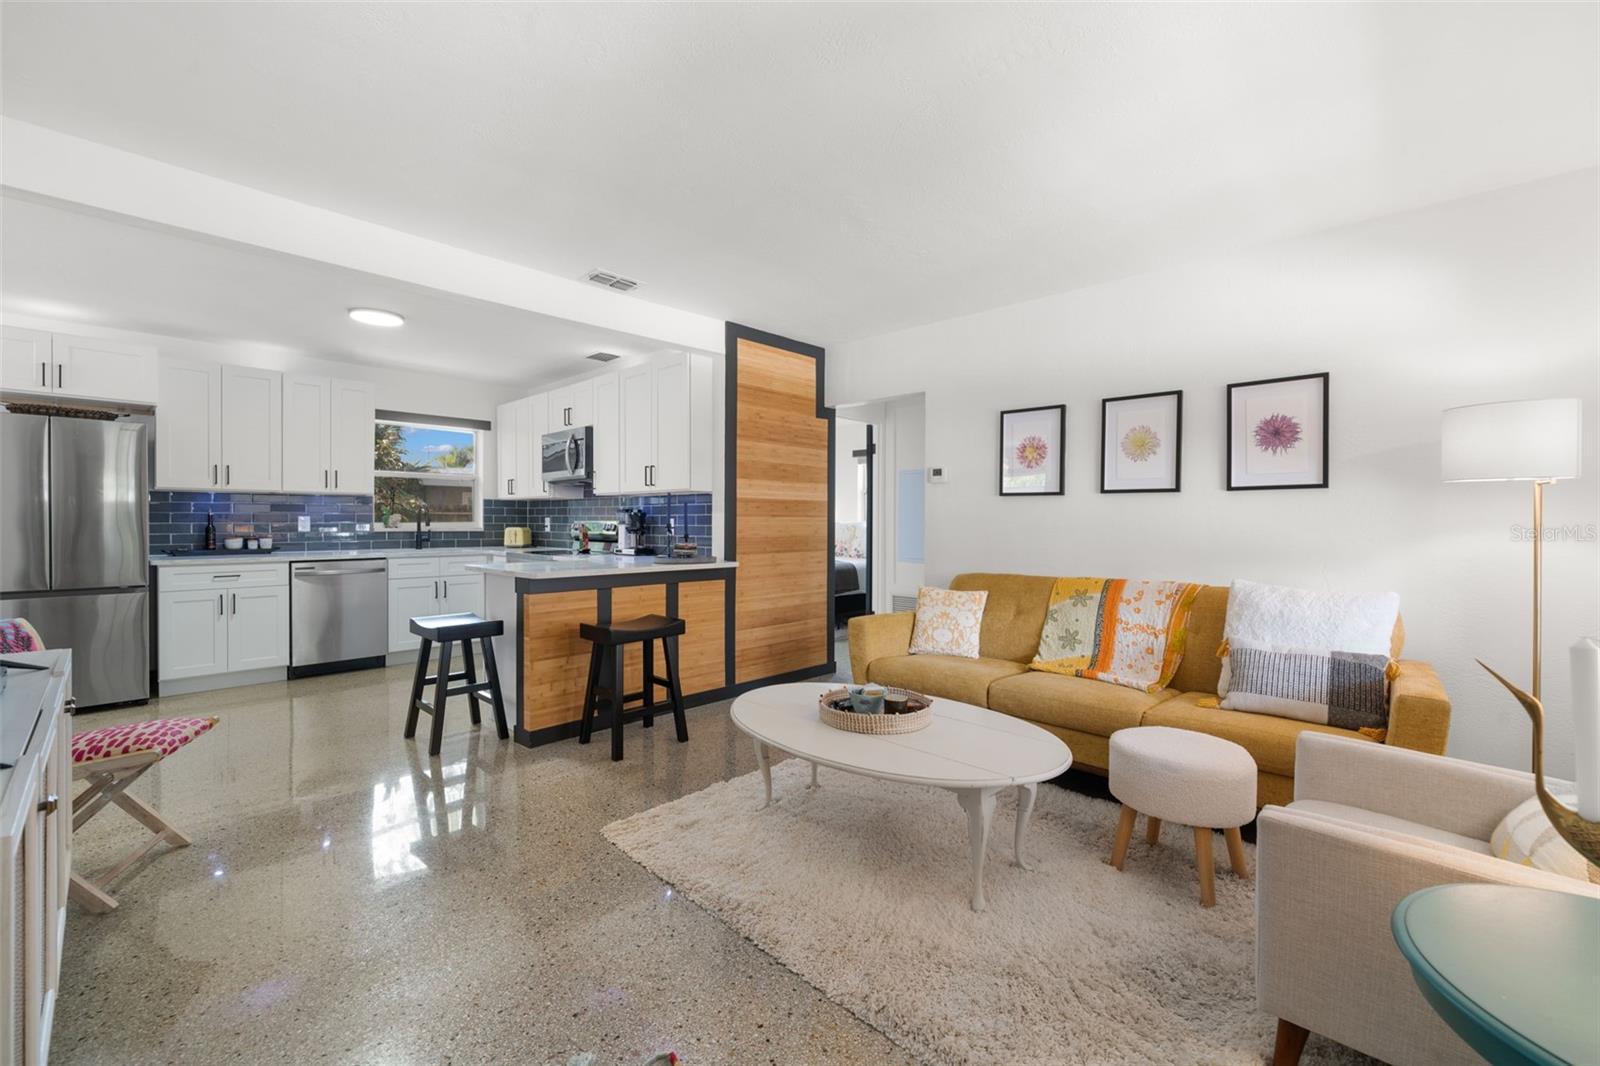 Spacious living room with sparkling terrazzo floors.